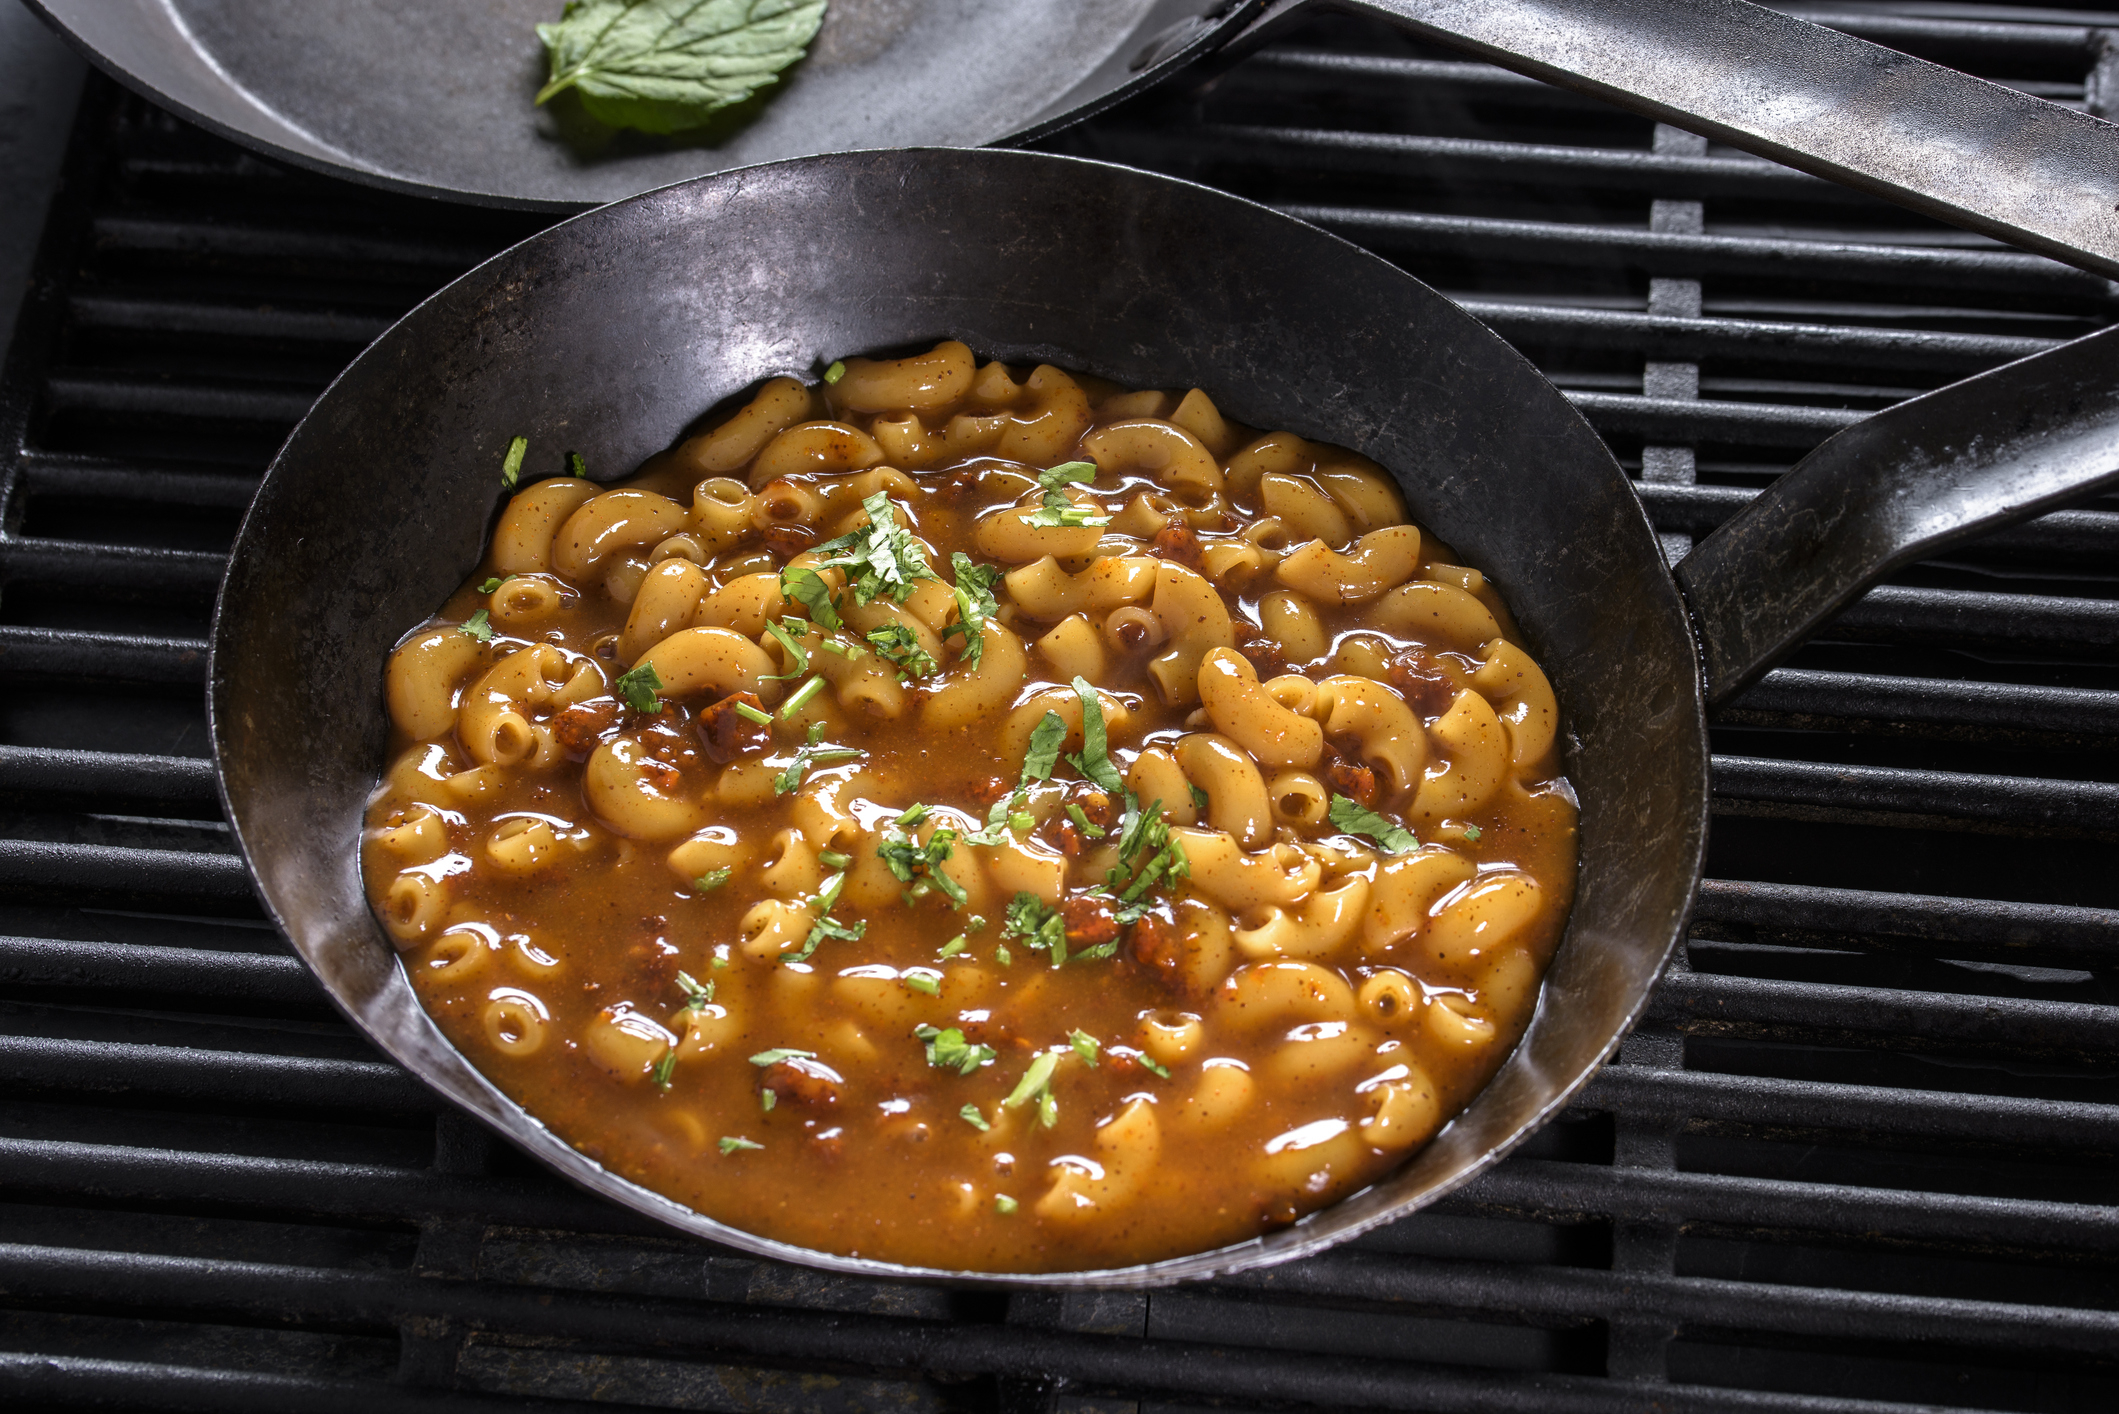 A skillet of baked beans garnished with herbs on a stove grille